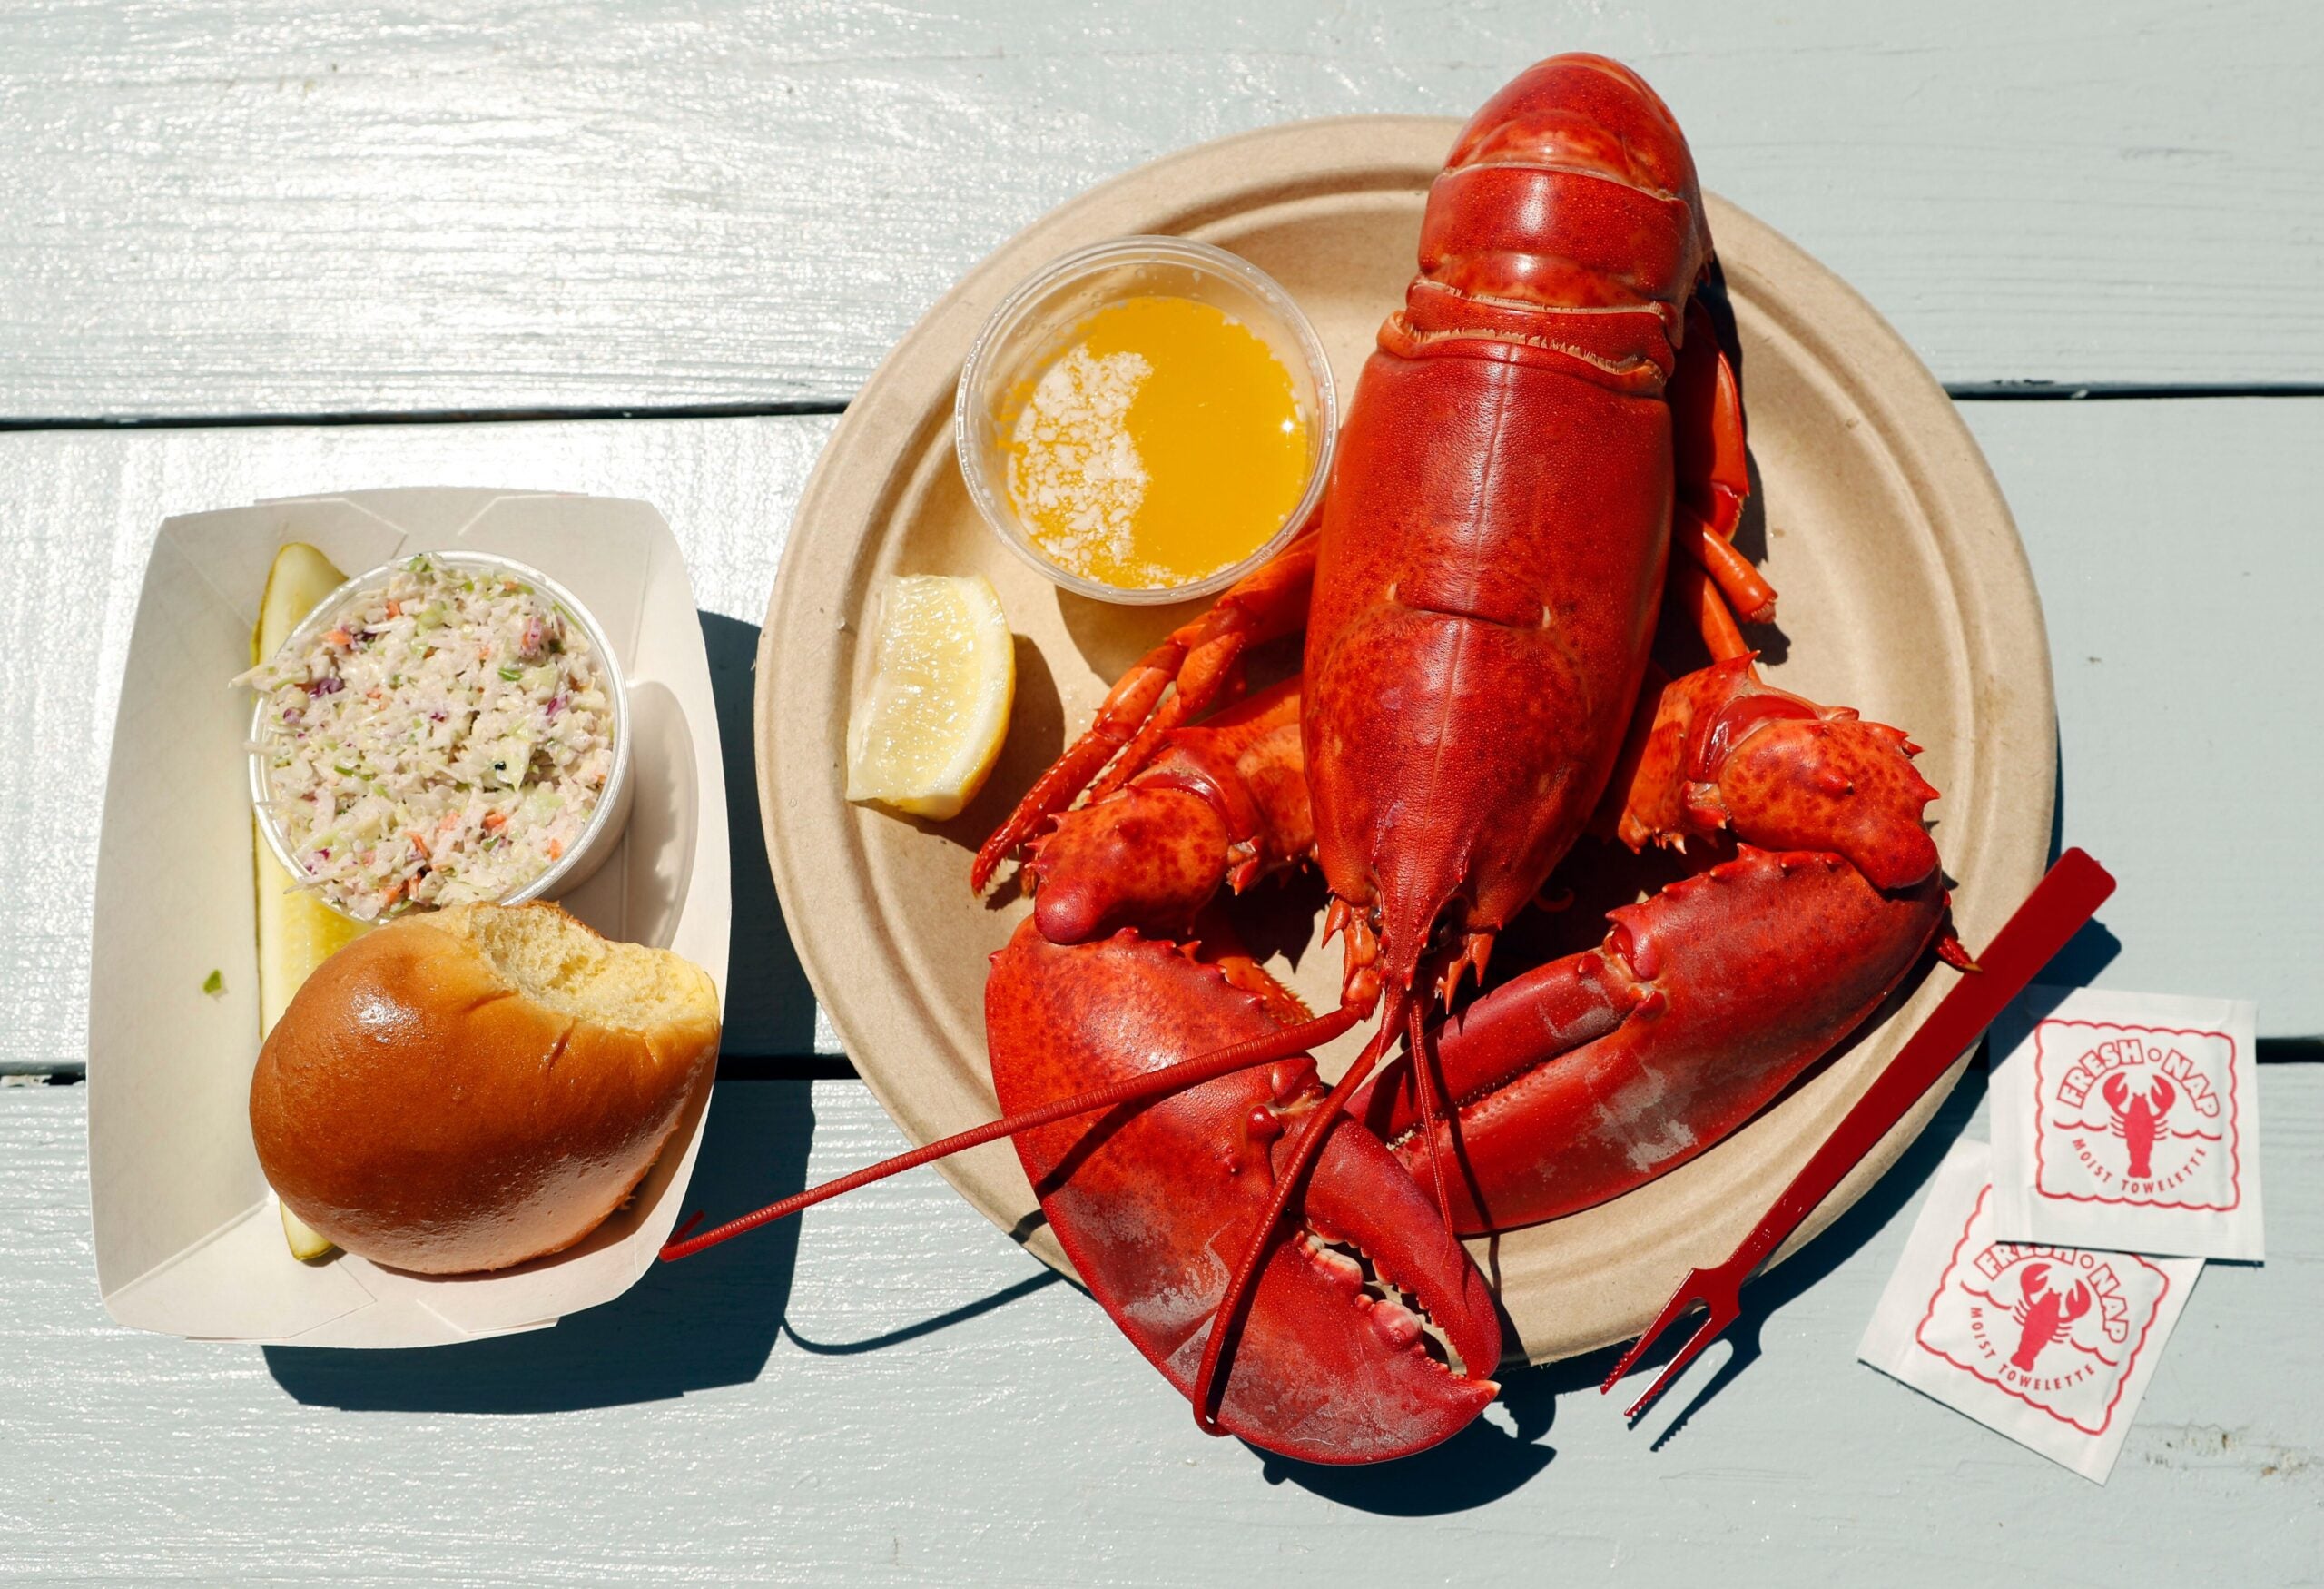 Maine Lobster Festival 75th annual event on August 4 to 7